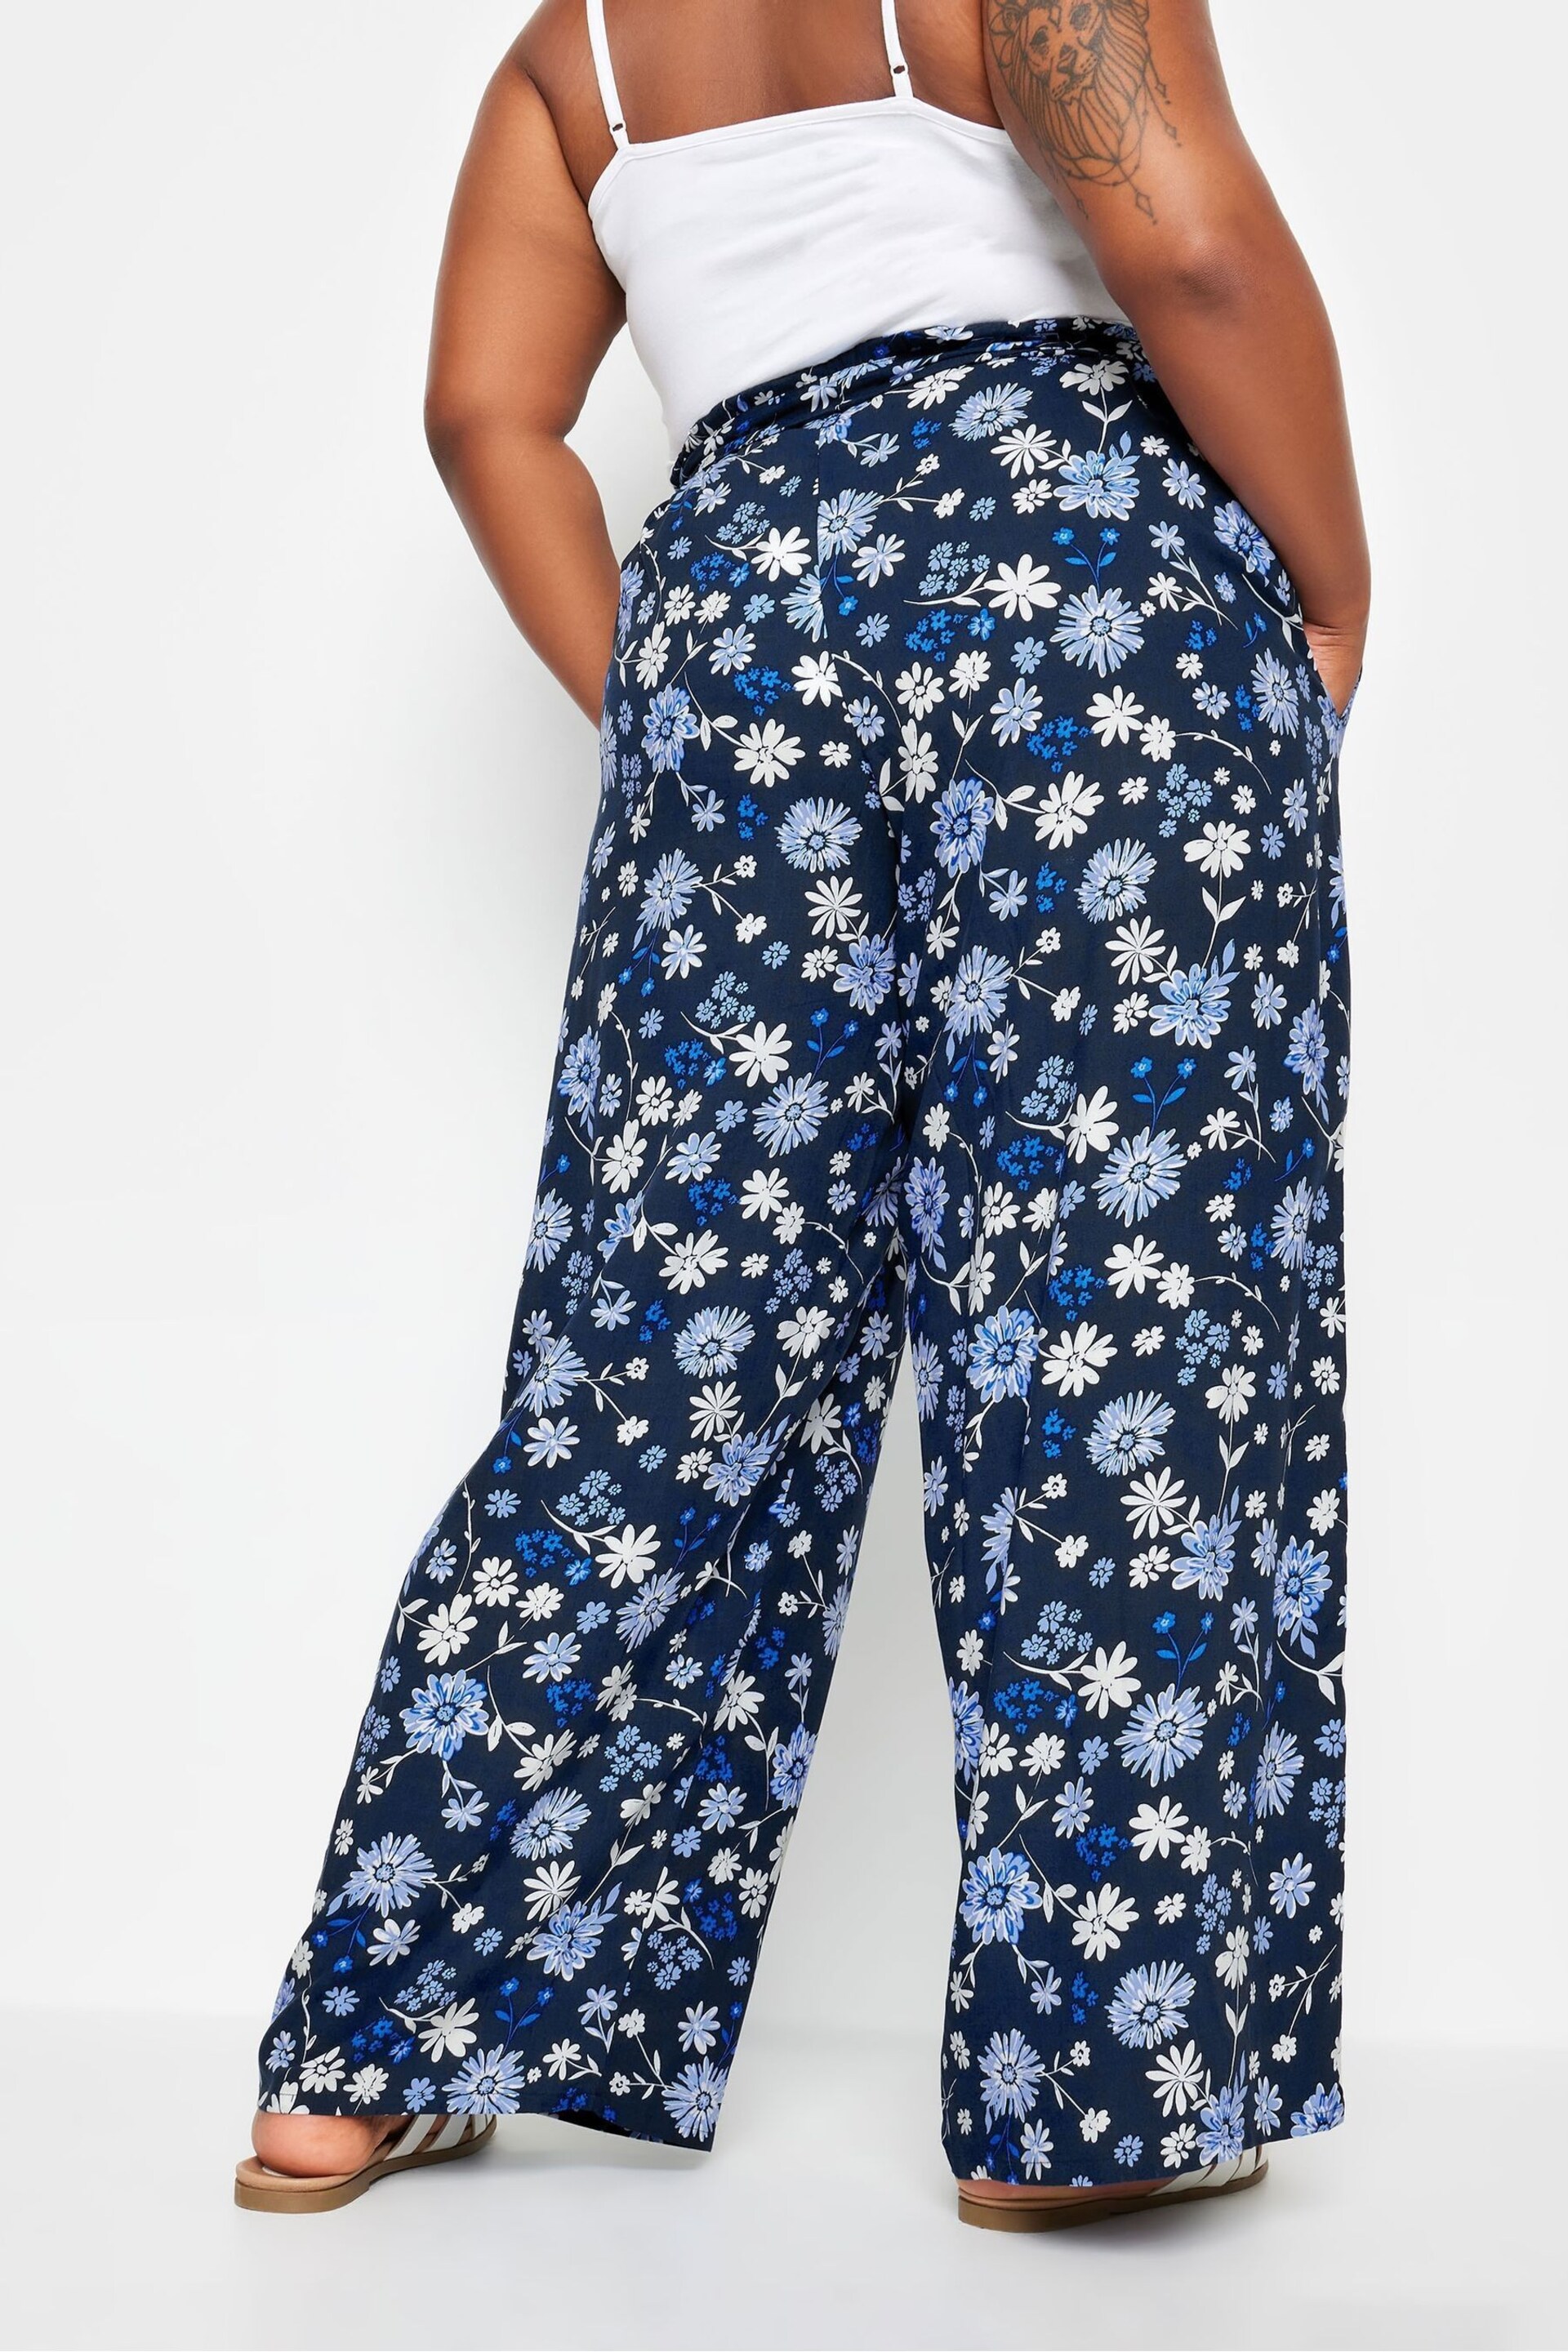 Yours Curve Blue Floral Print Shirred Wide Leg Trousers - Image 2 of 5